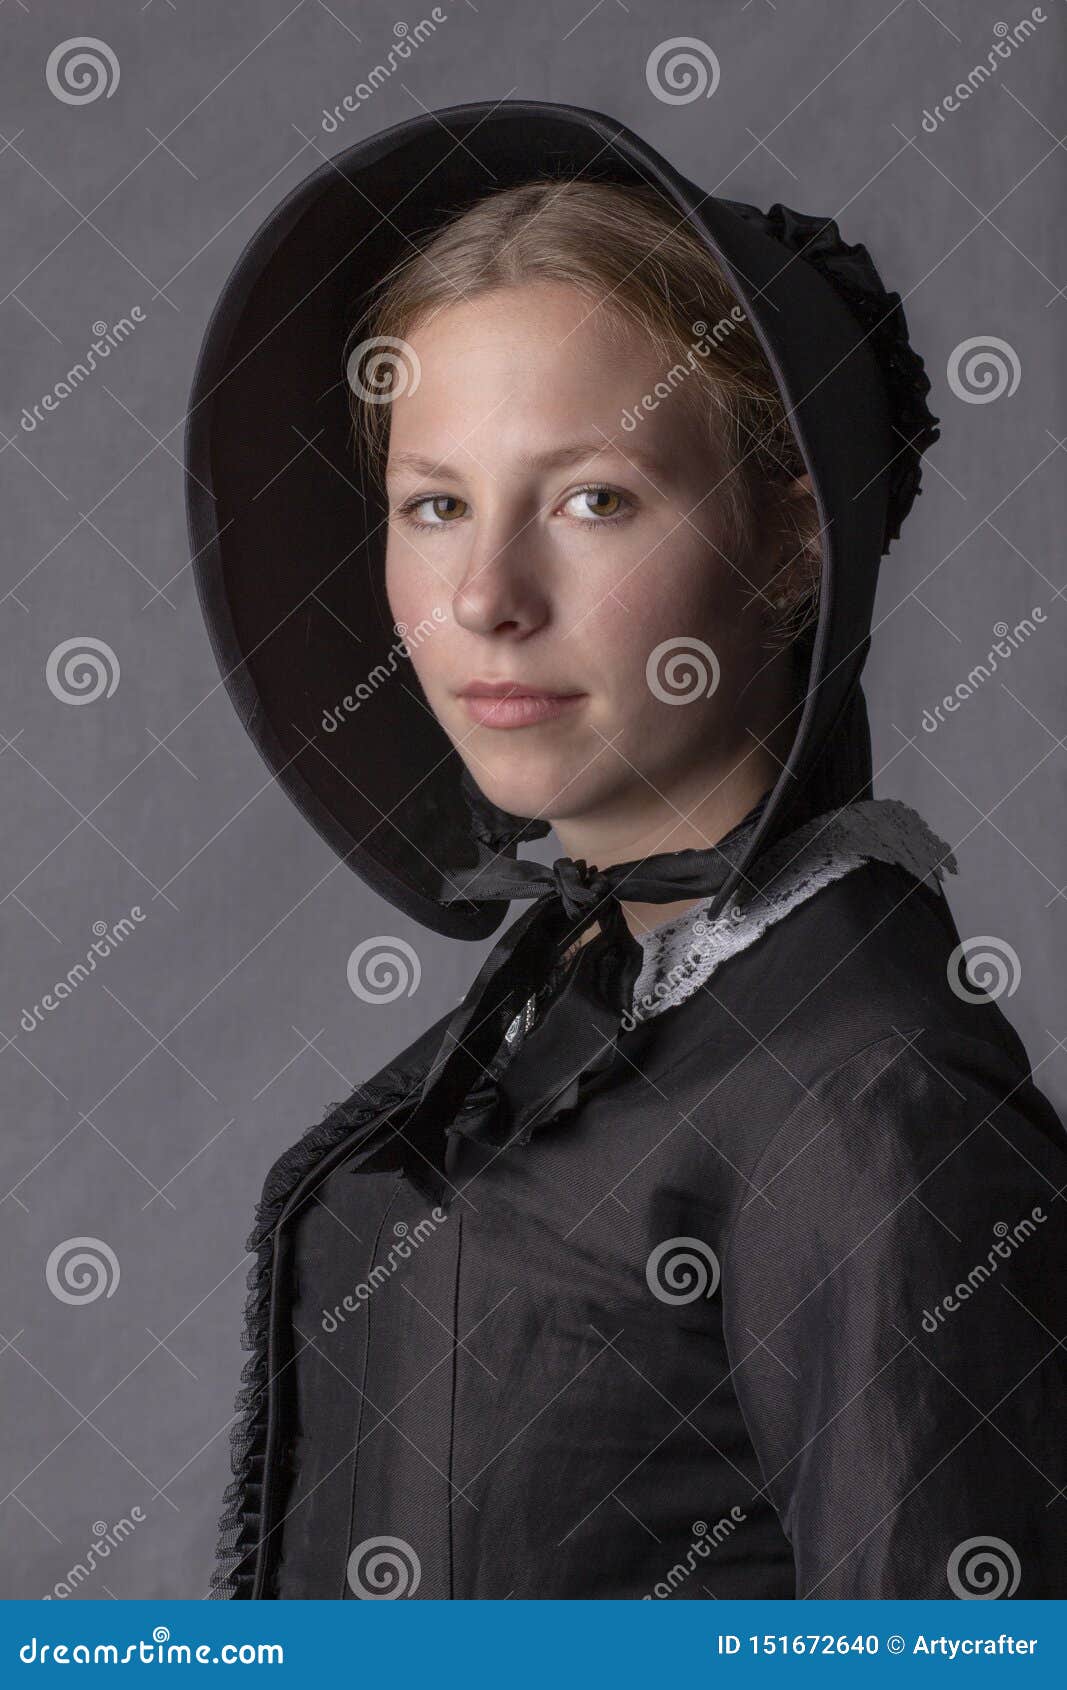 victorian woman in a black bodice and bonnet